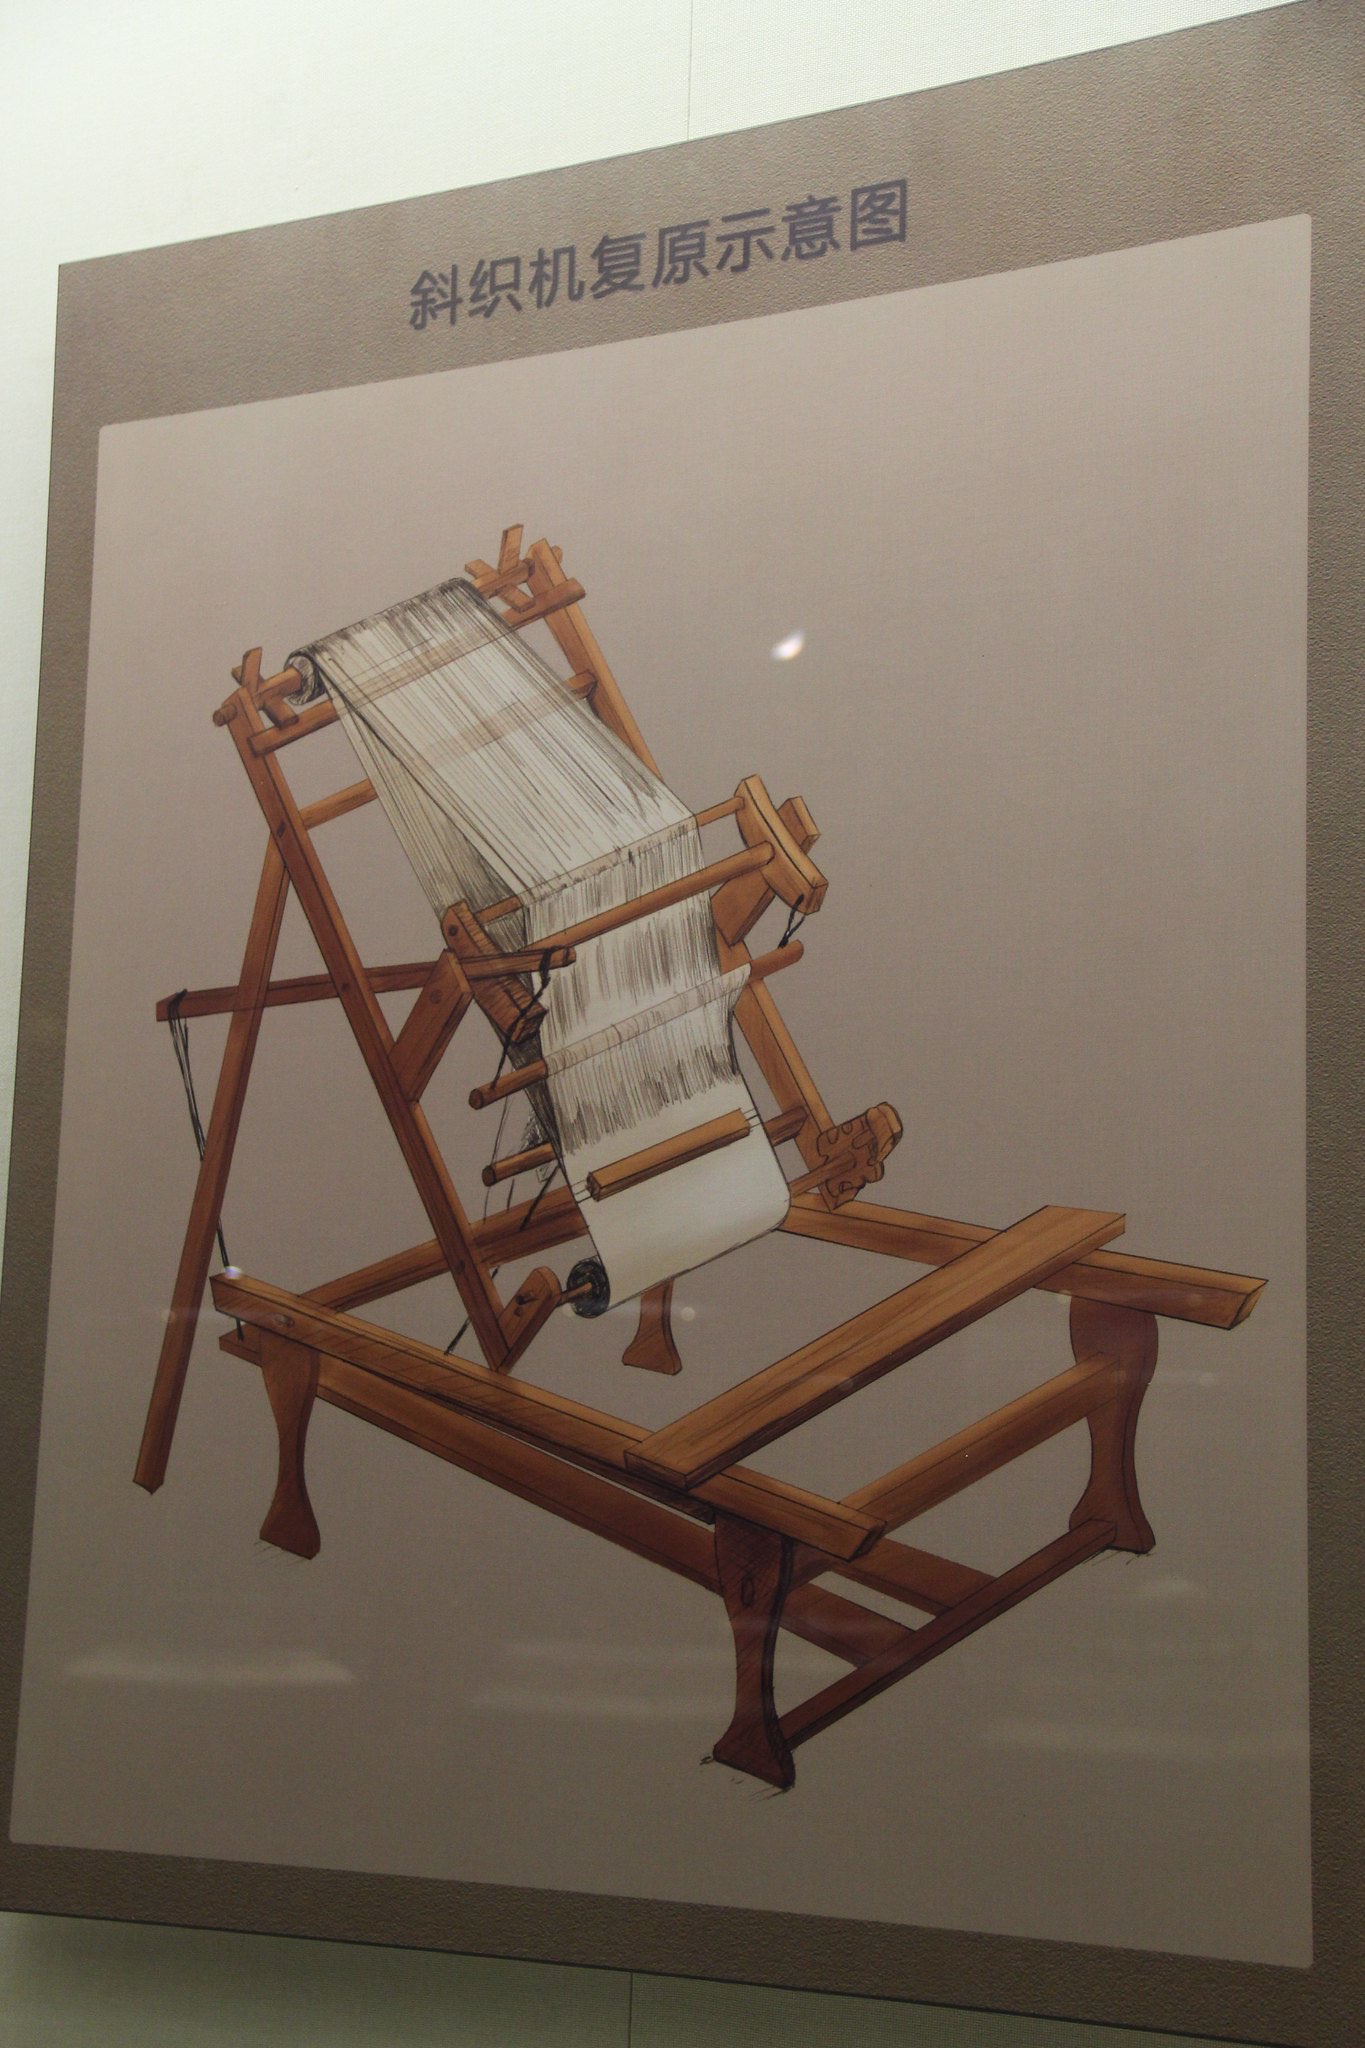 Diagram of a loom, in a Chinese museum